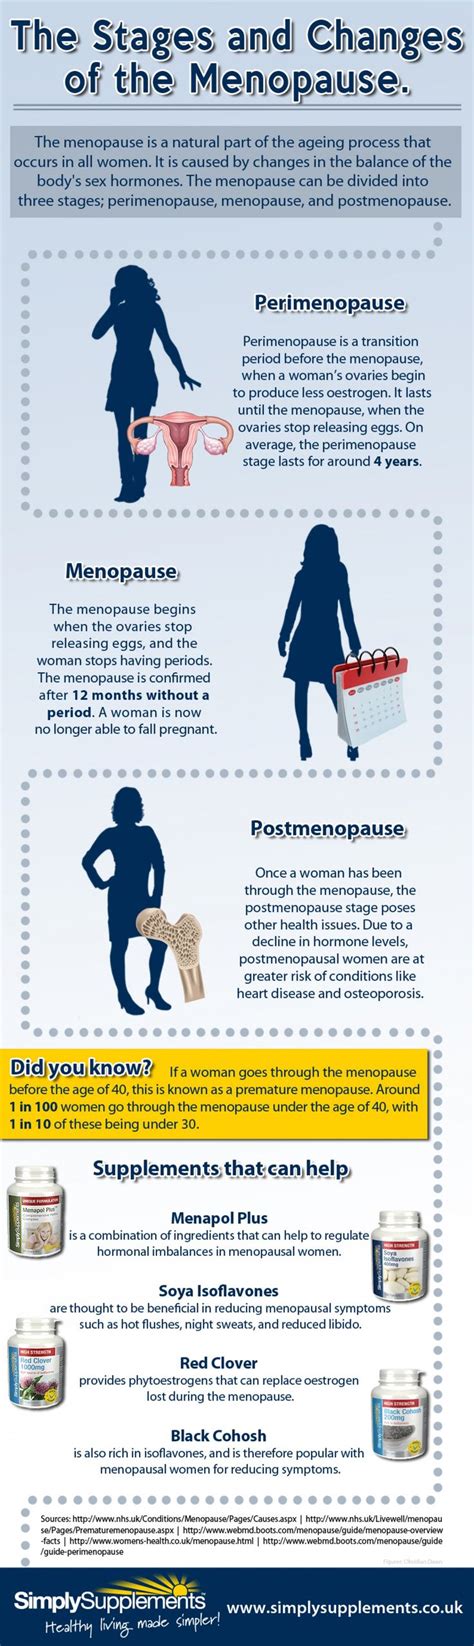 menopause infographic facts